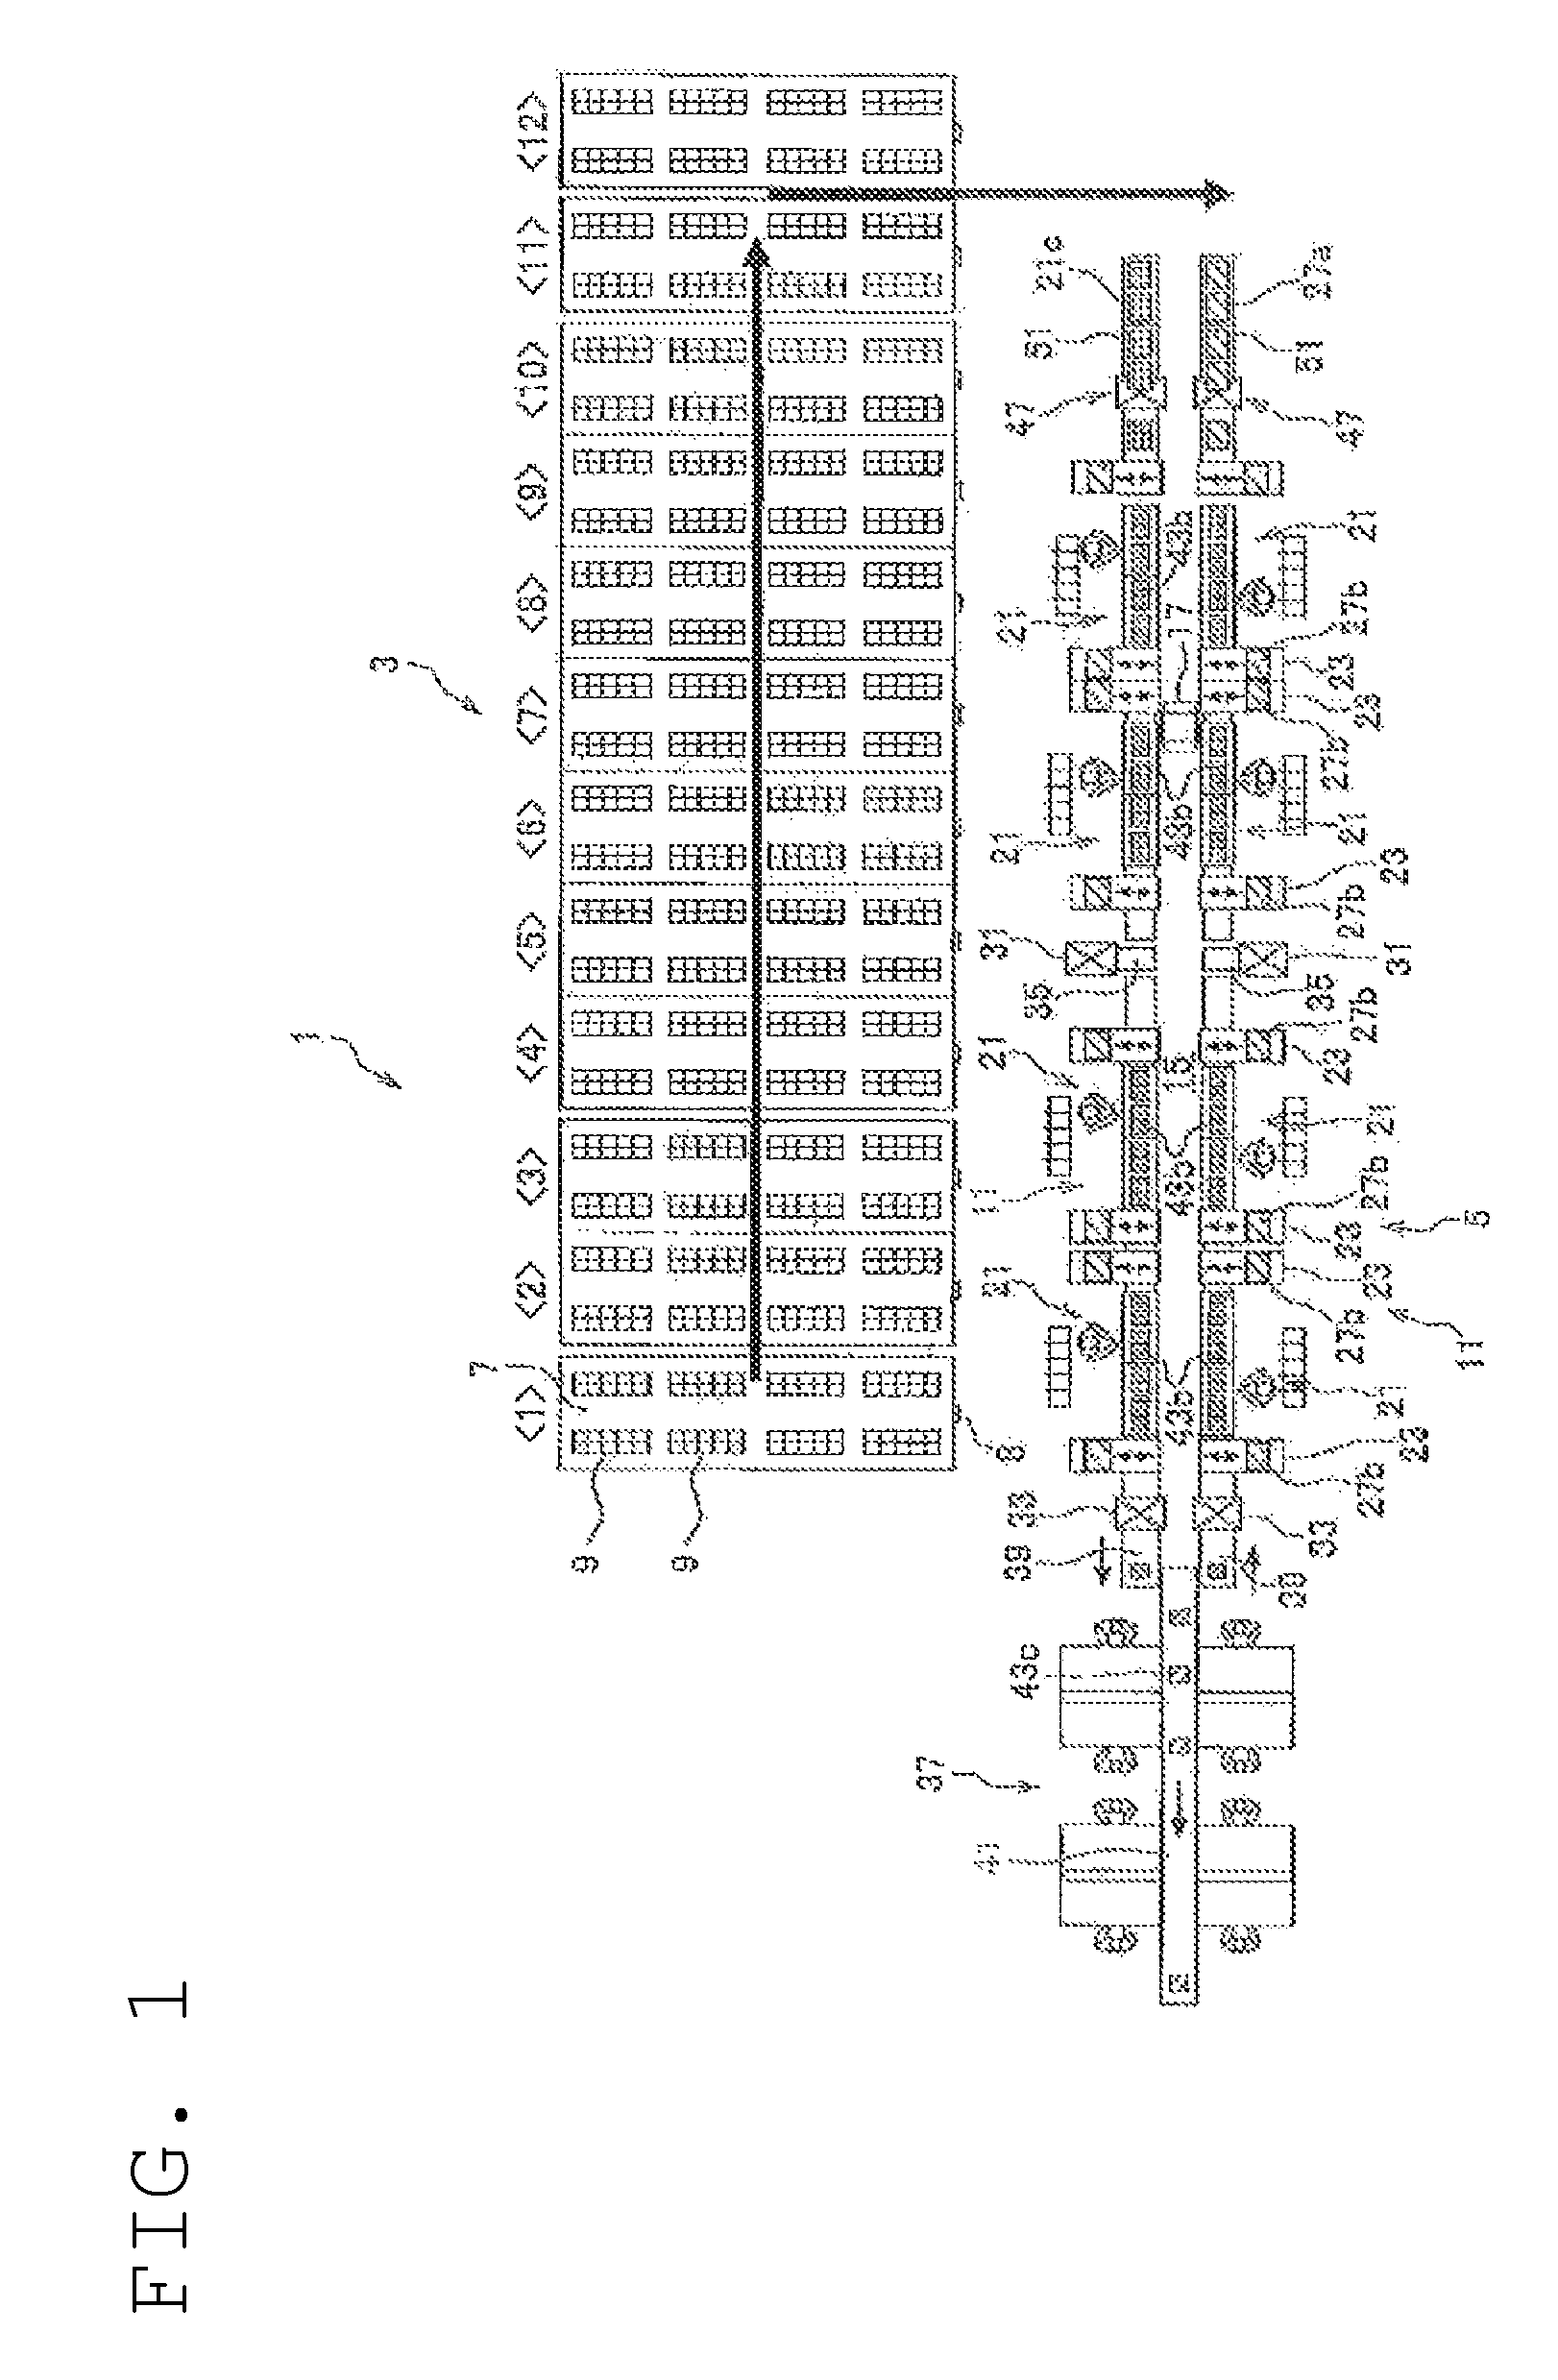 Picking and assorting system